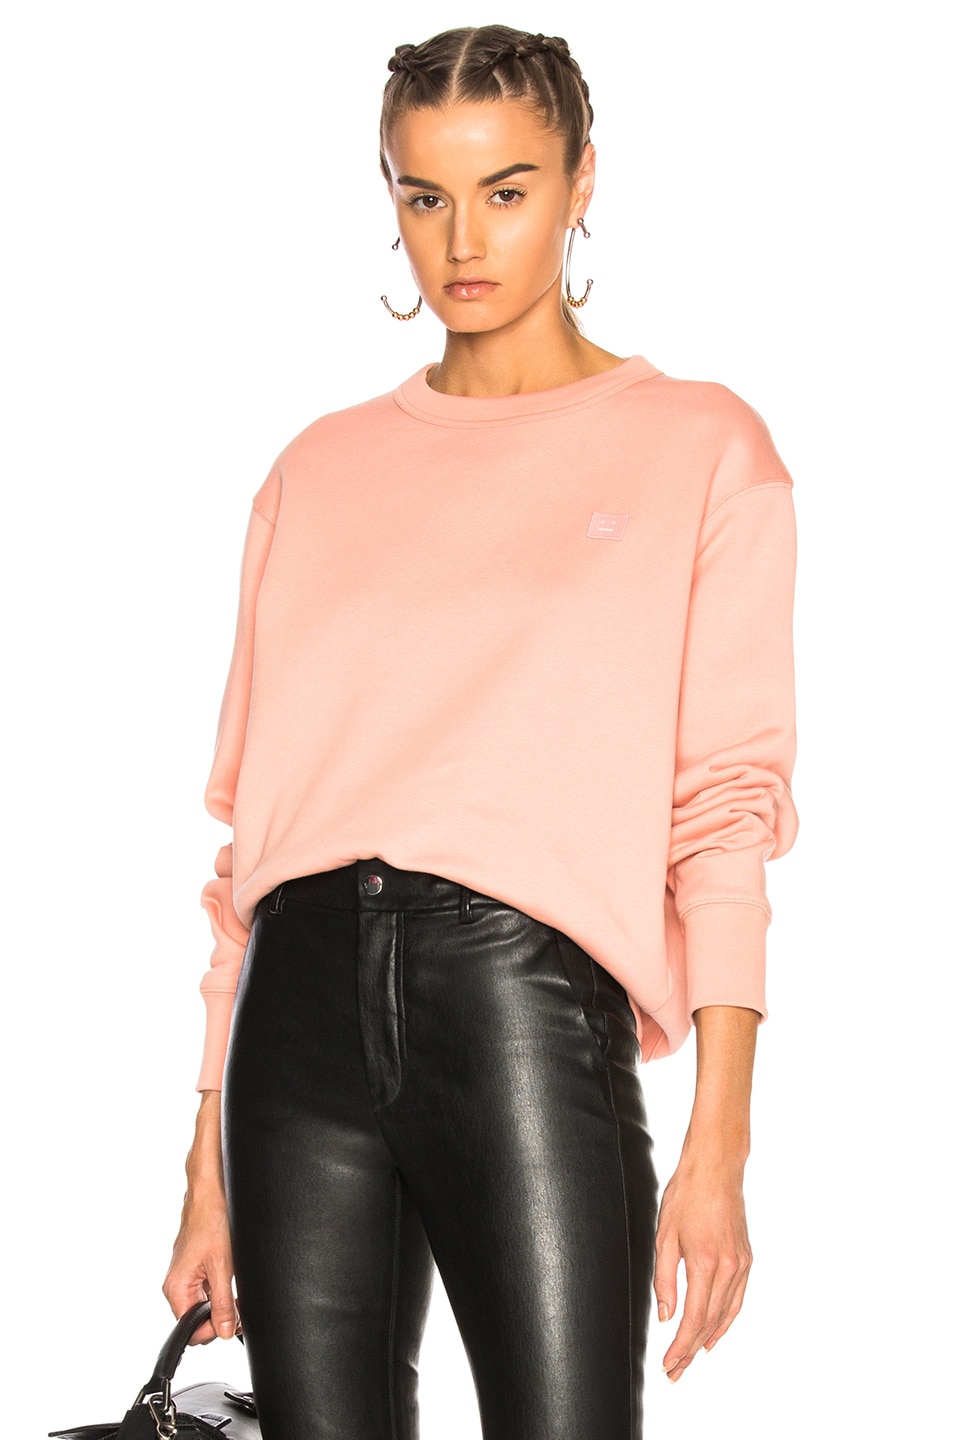 Acne Studios Fairview Face Sweater in Pale Pink | FWRD